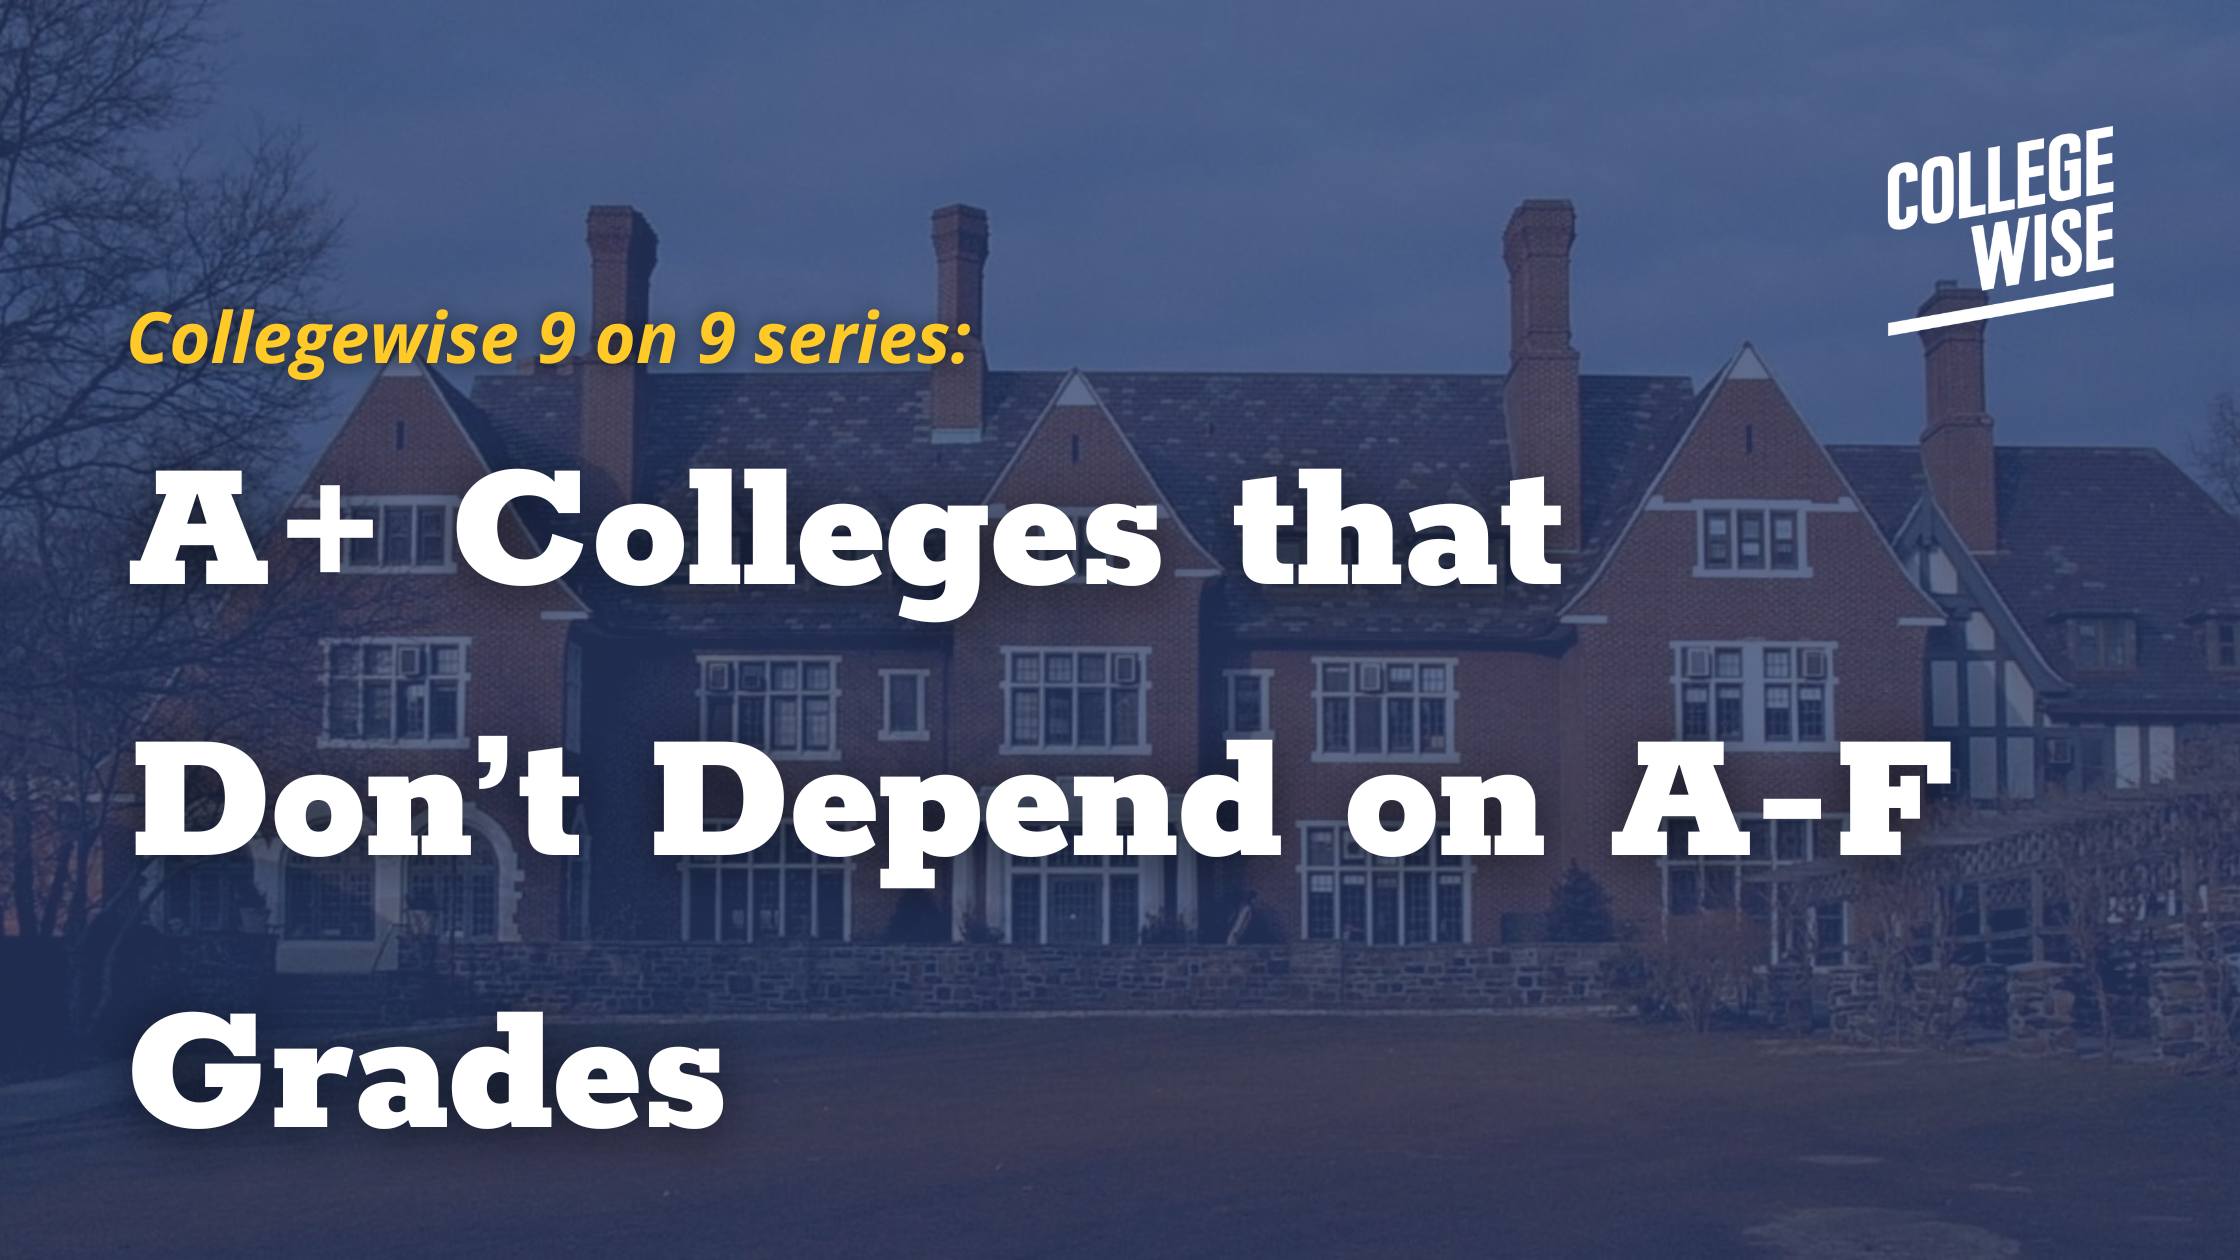 A+ Colleges that Don’t Depend on A-F Grades